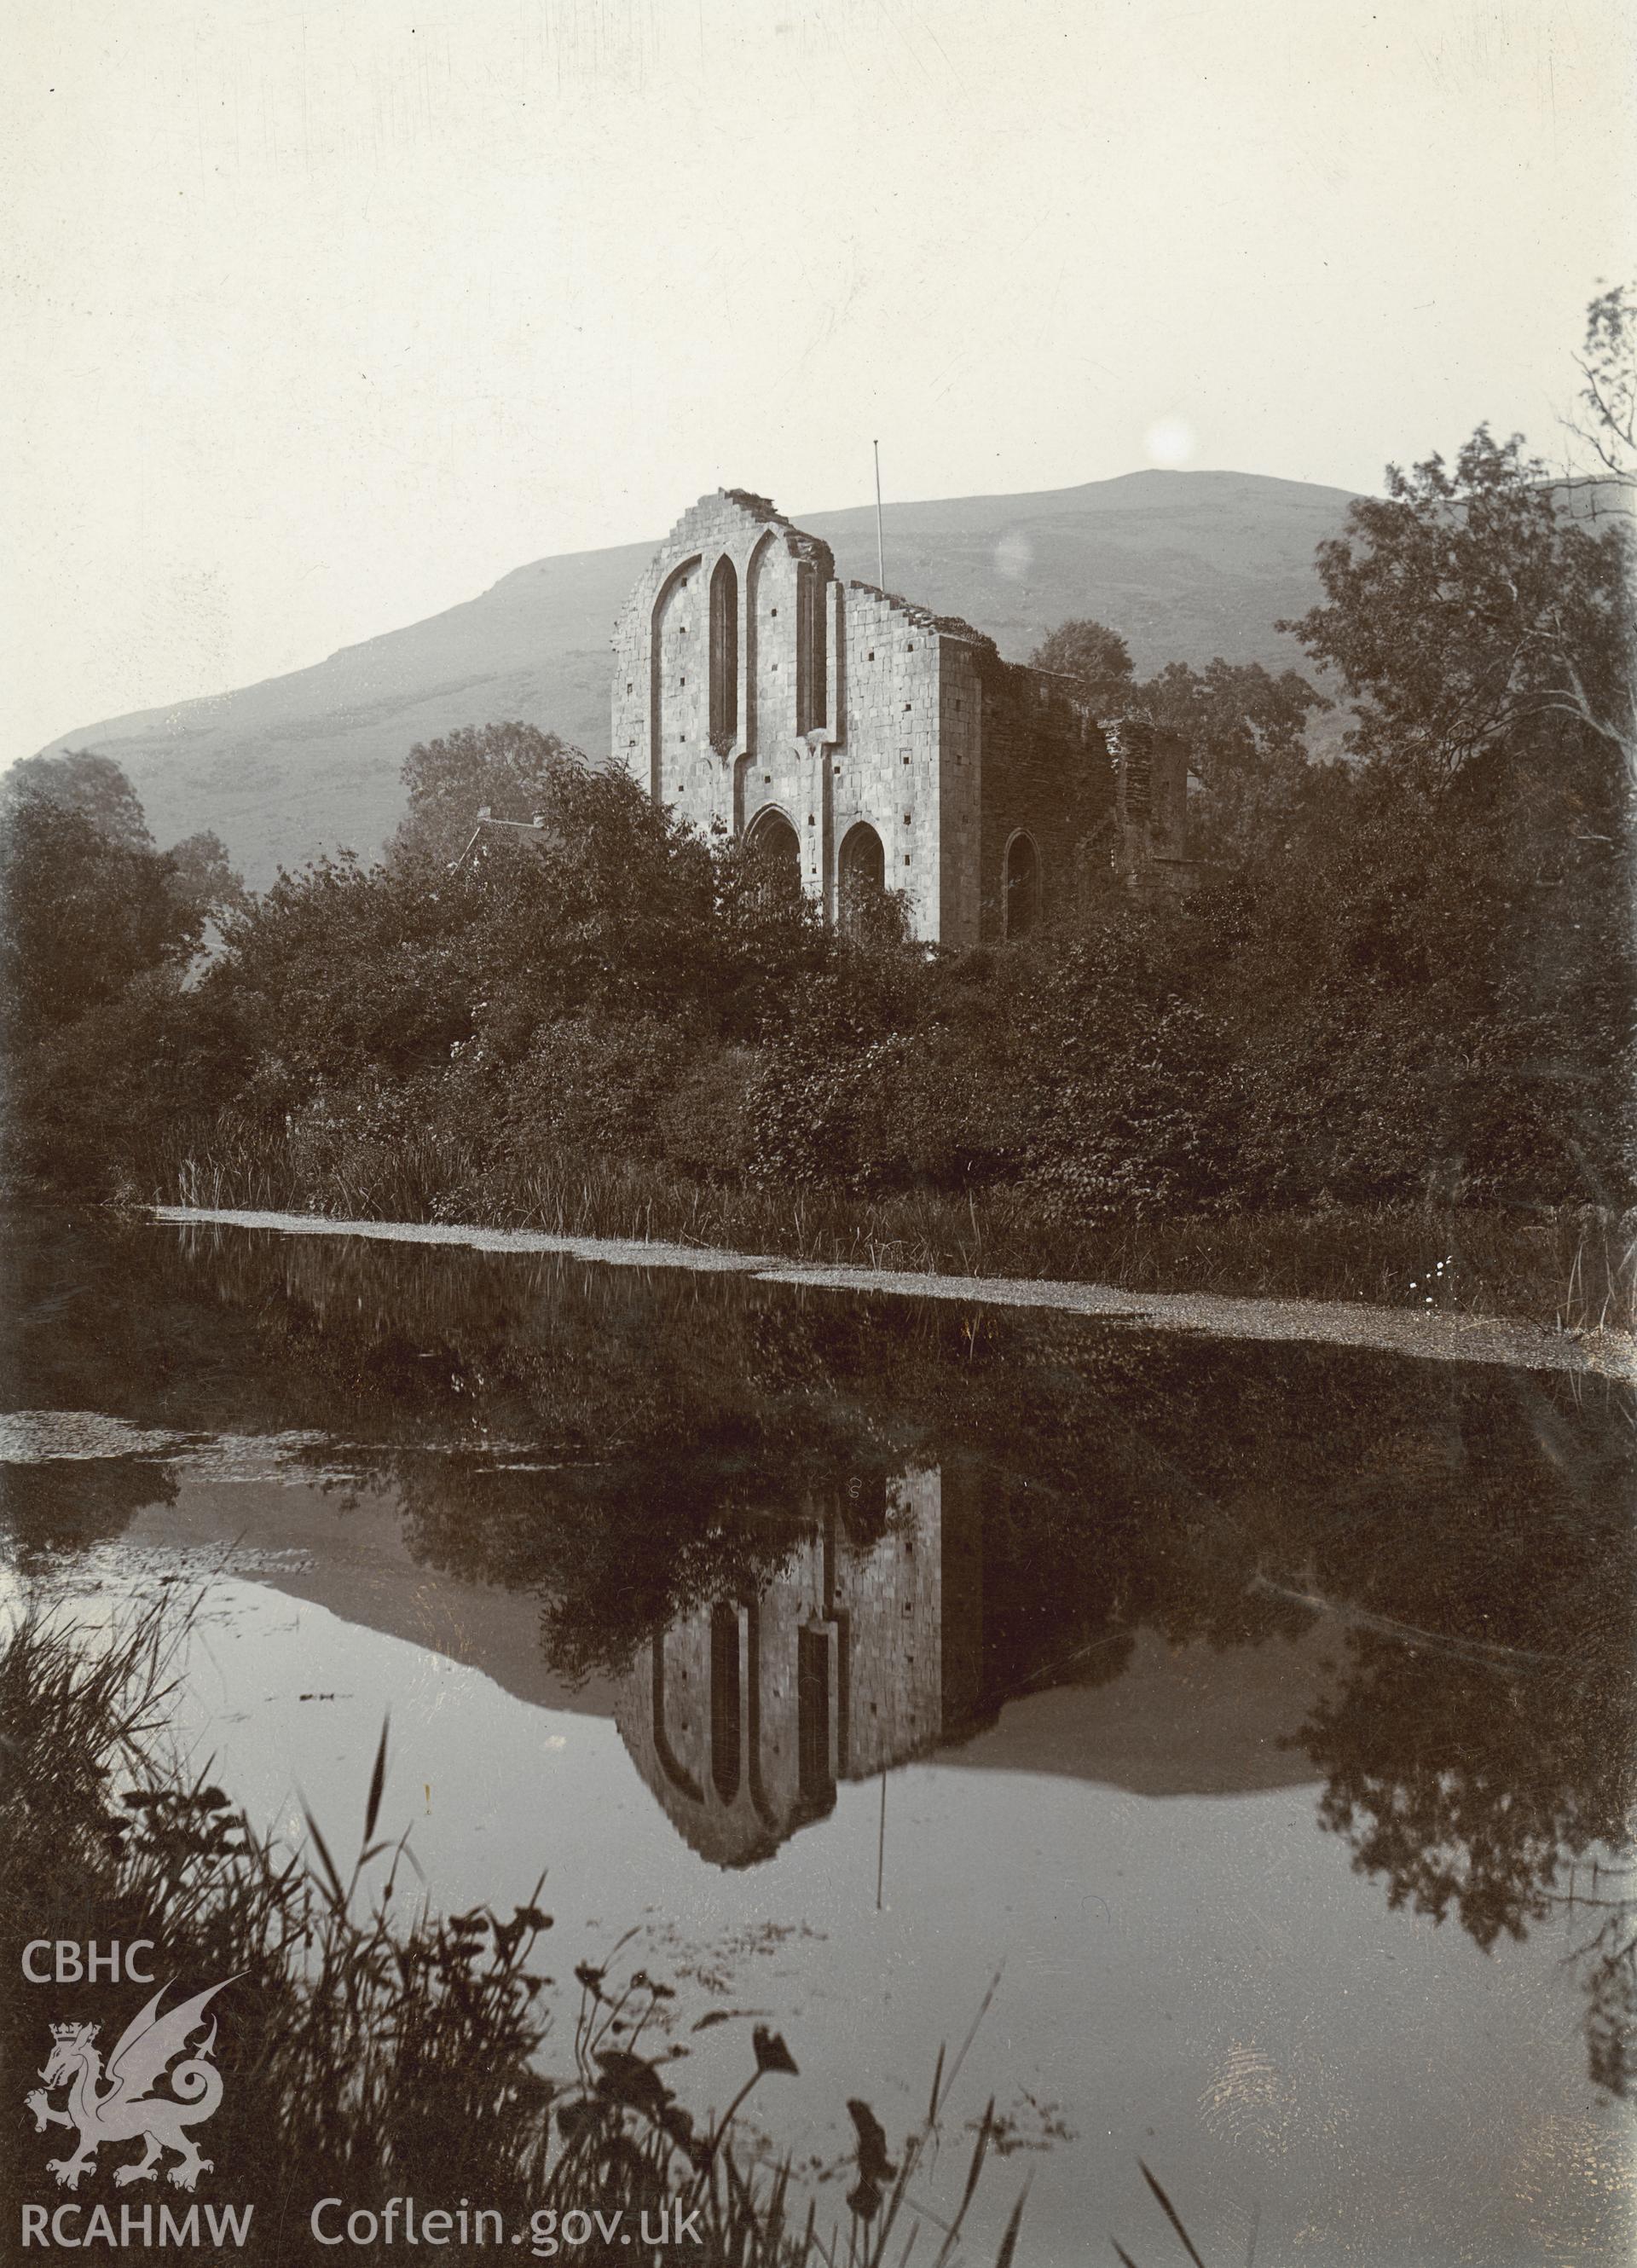 Digital copy of a black and white print showing gable elevation of Valle Crucis Abbey, photo by Fletcher Moss, copyright: Manchester Library.